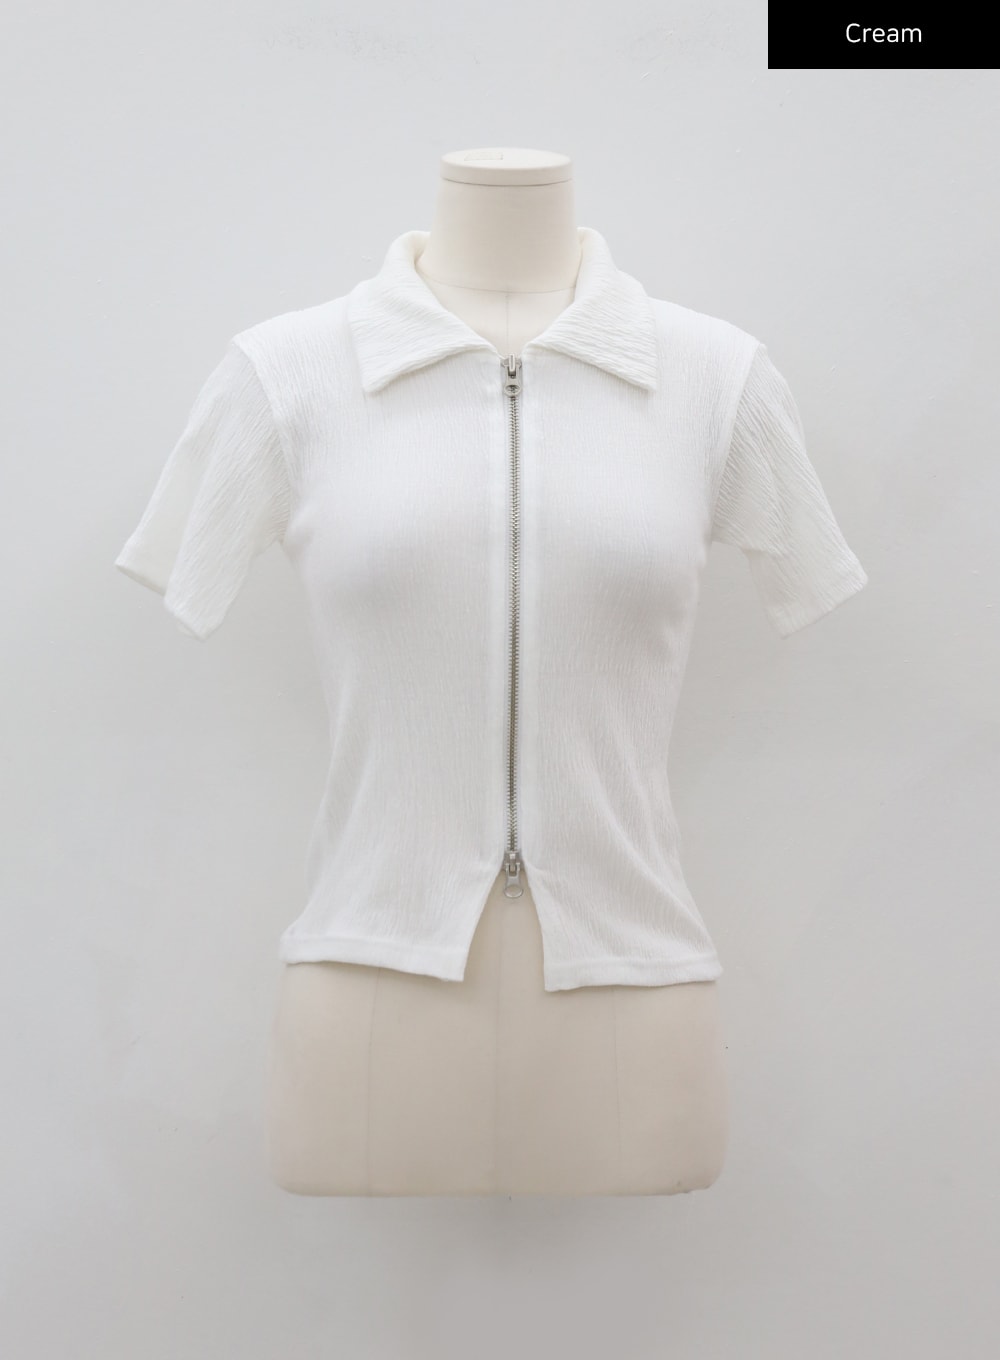 Two-Way Zip-Up Collared Top BJ17